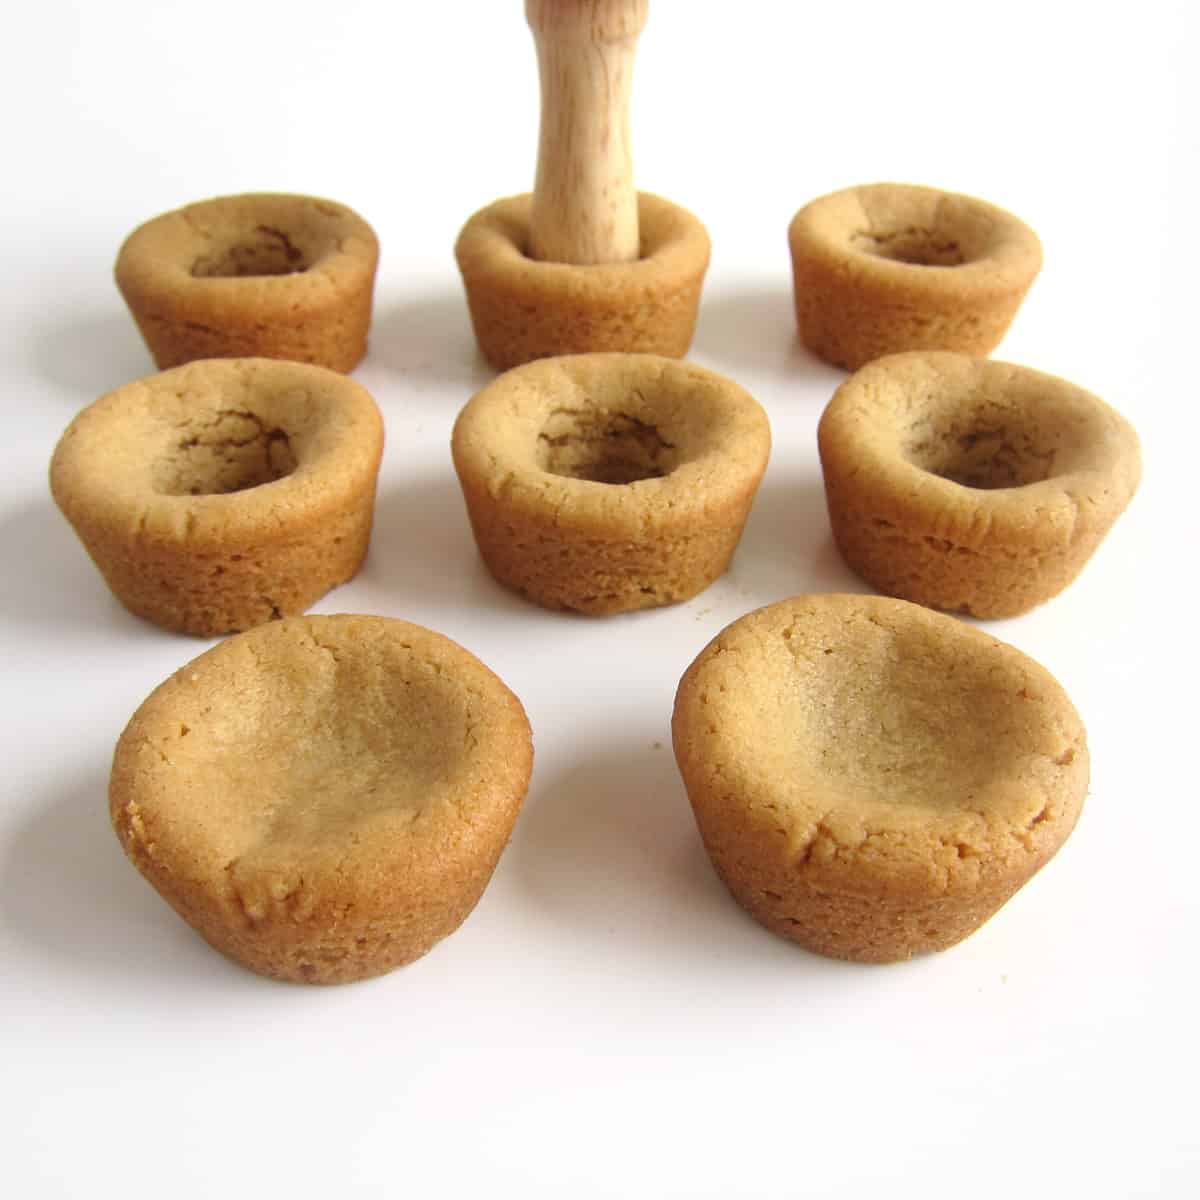 press a wooden spoon handle into the peanut butter cookie cups